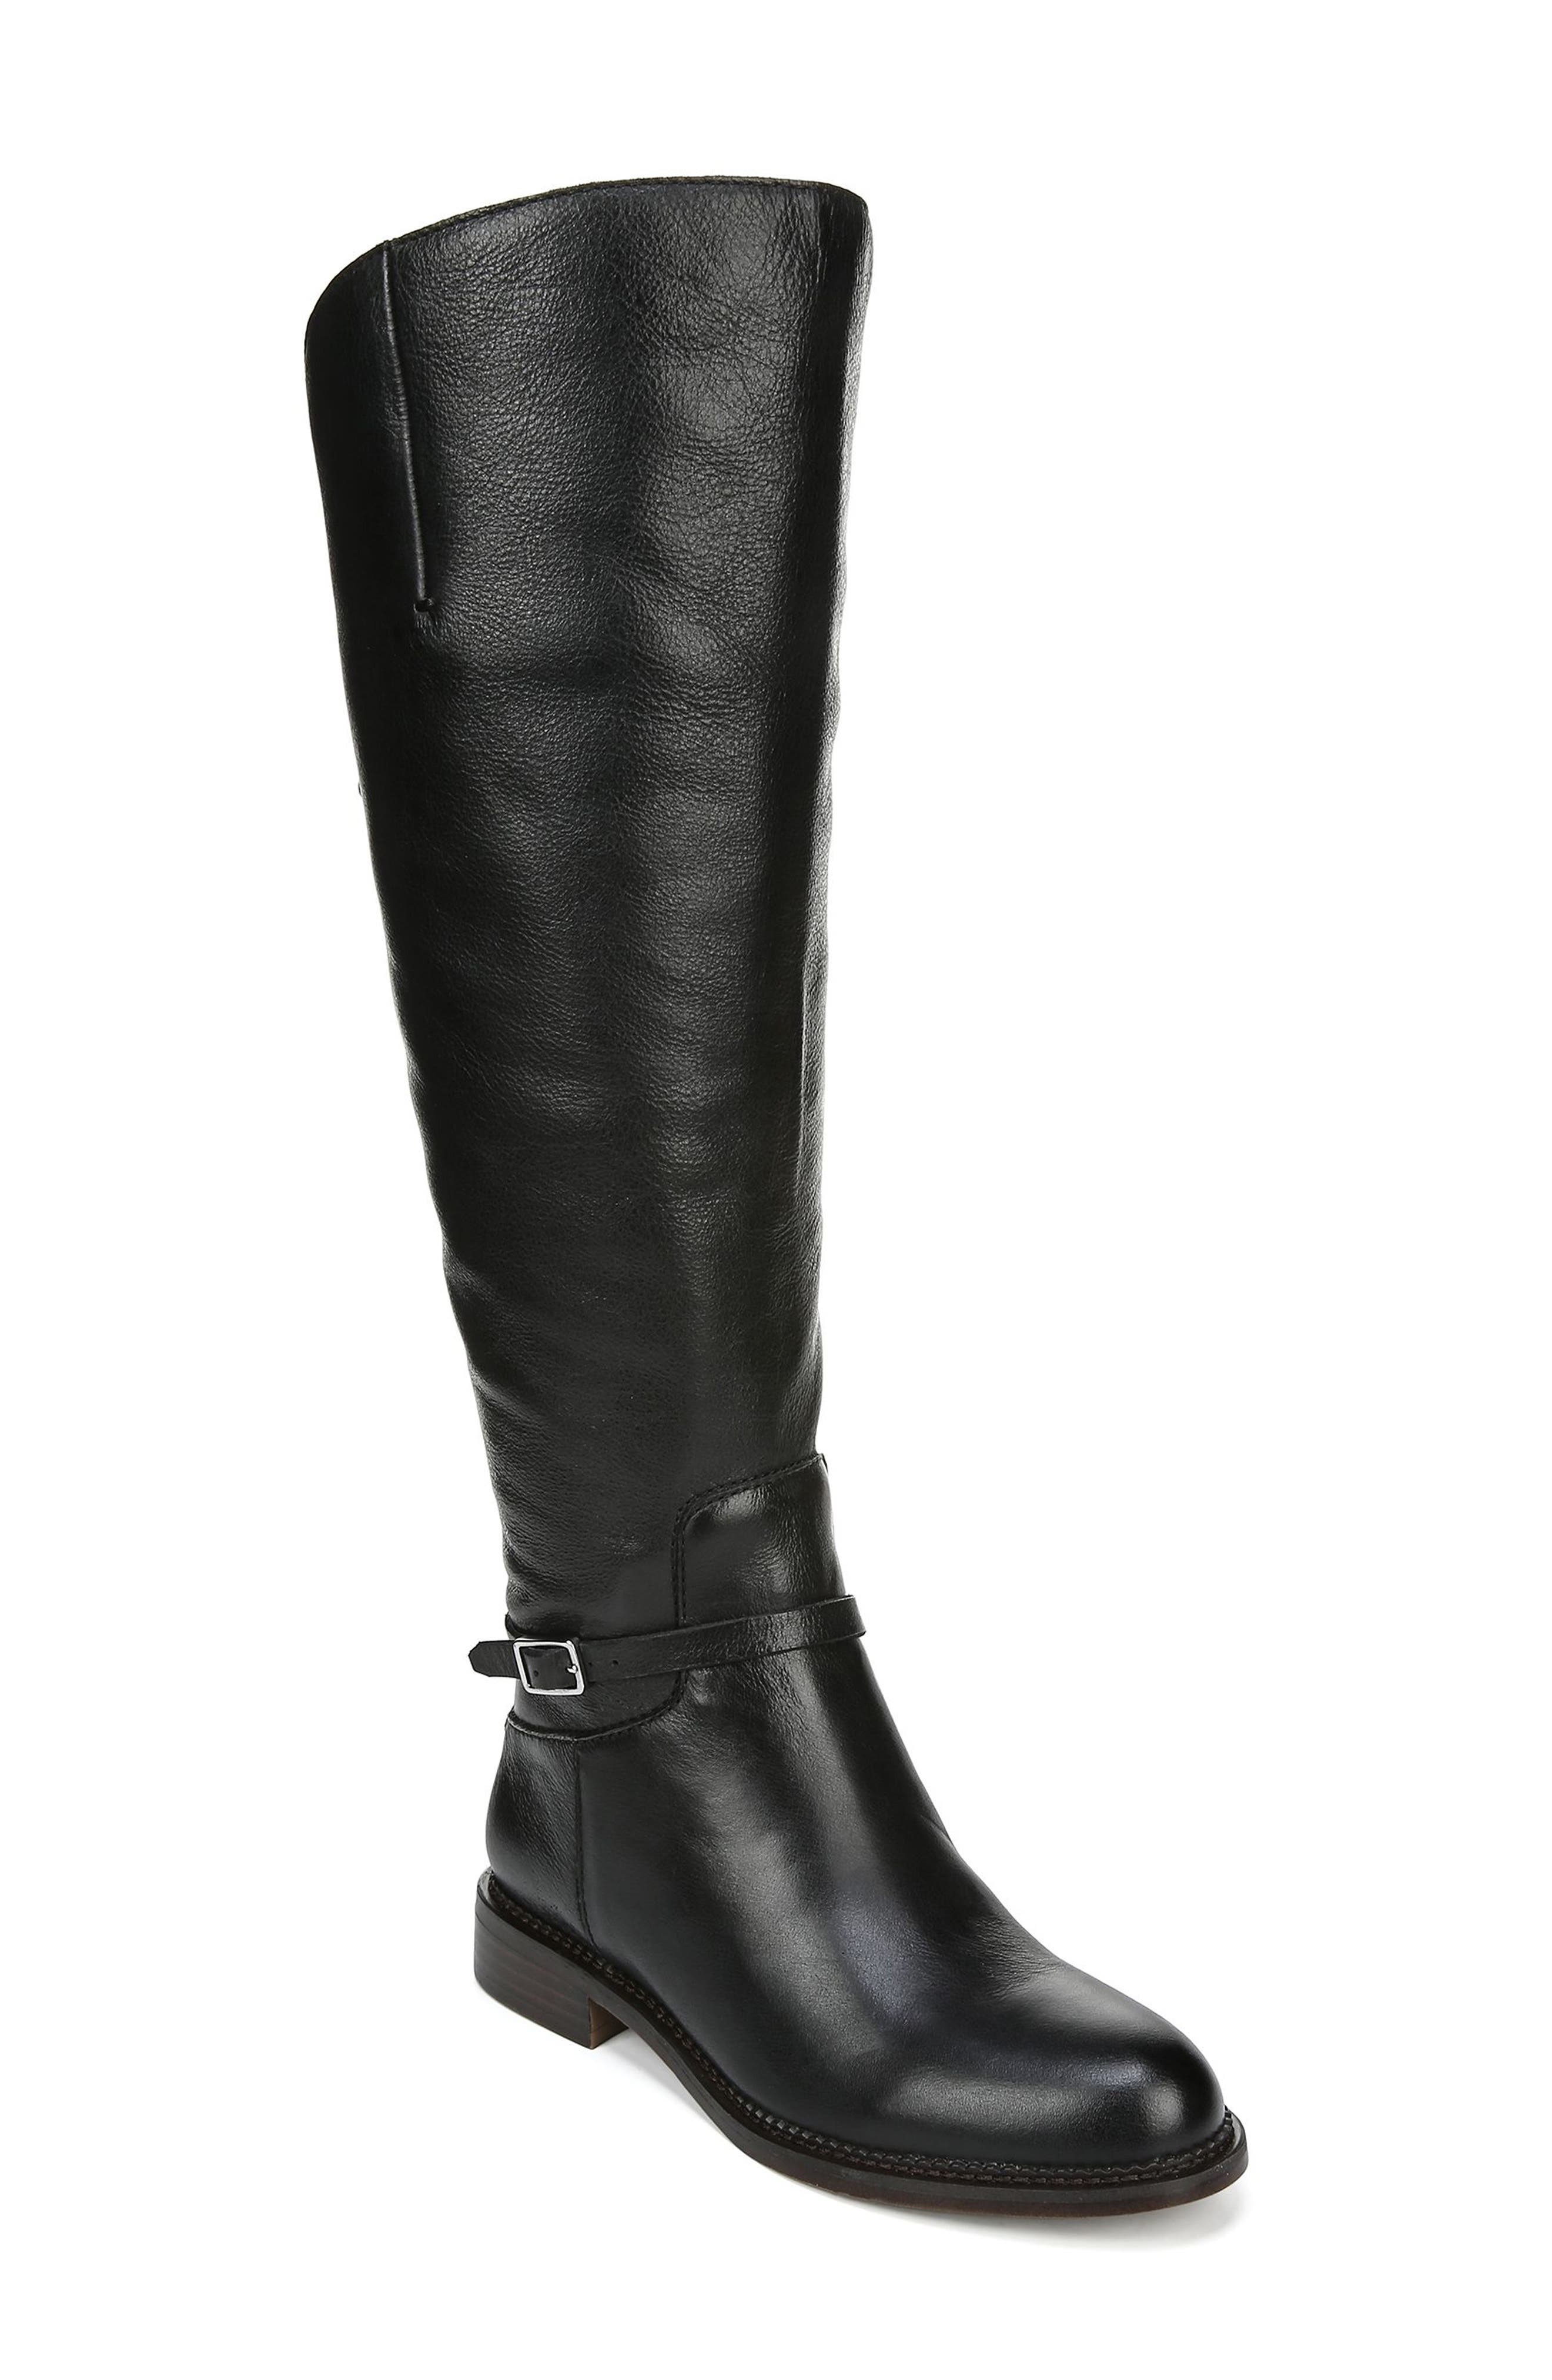 black leather riding boots wide calf